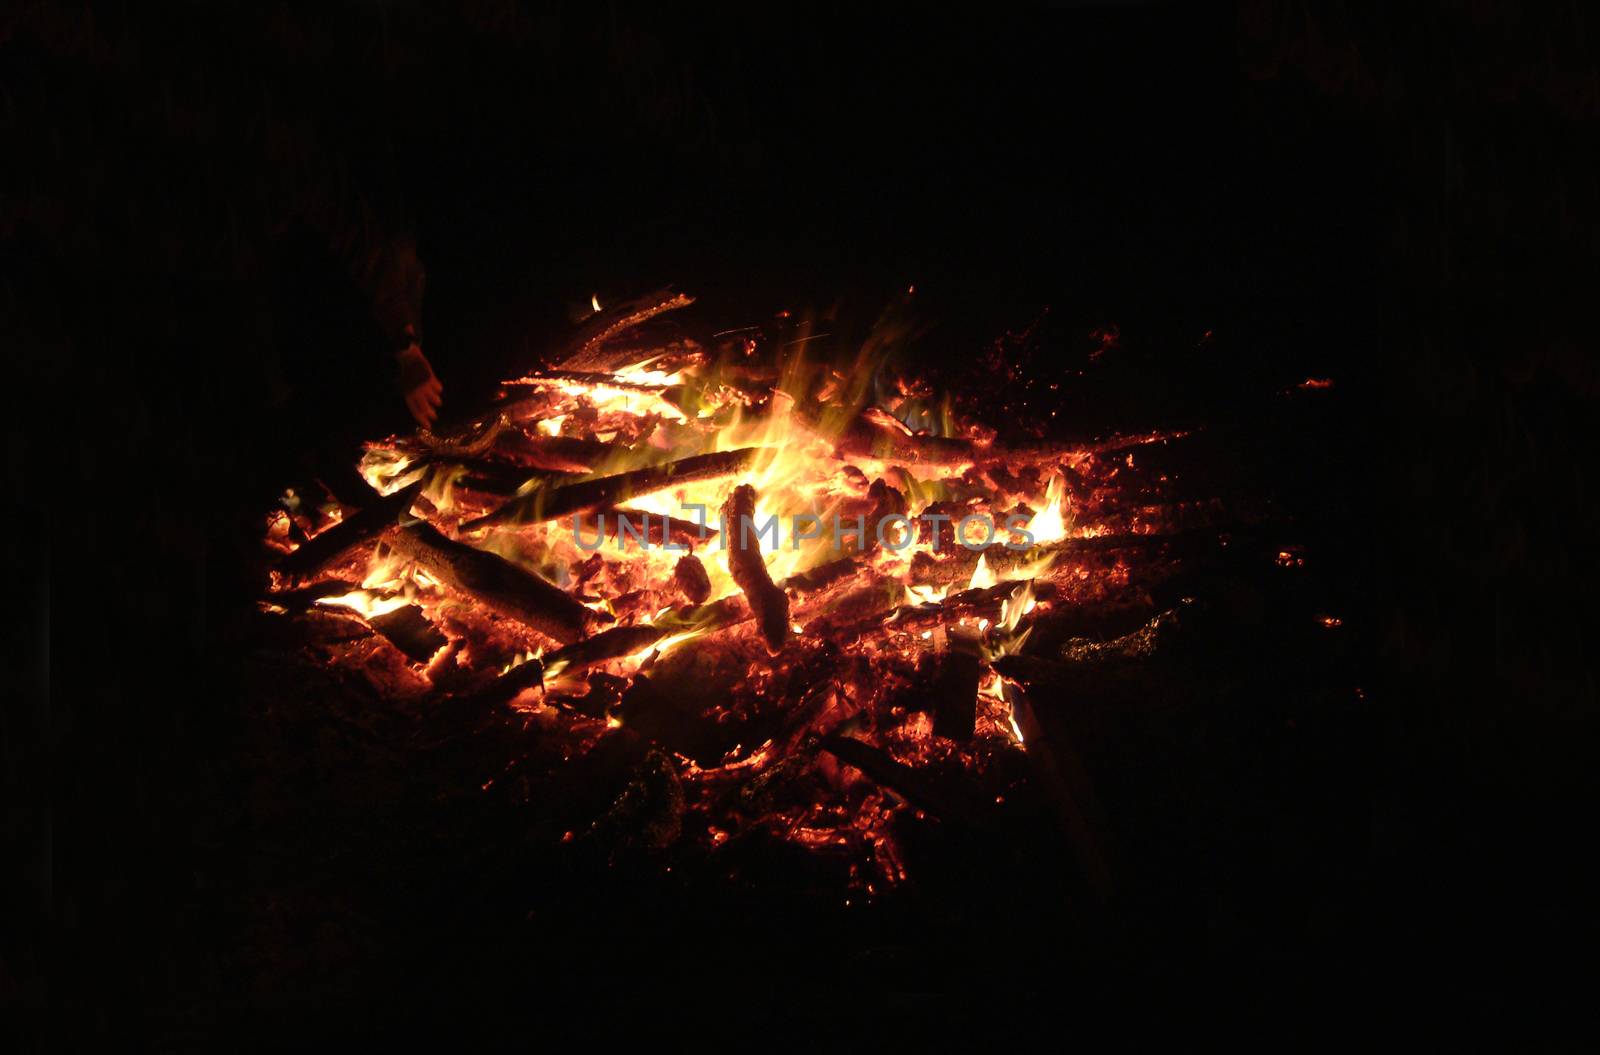 The dying embers of a camp fire